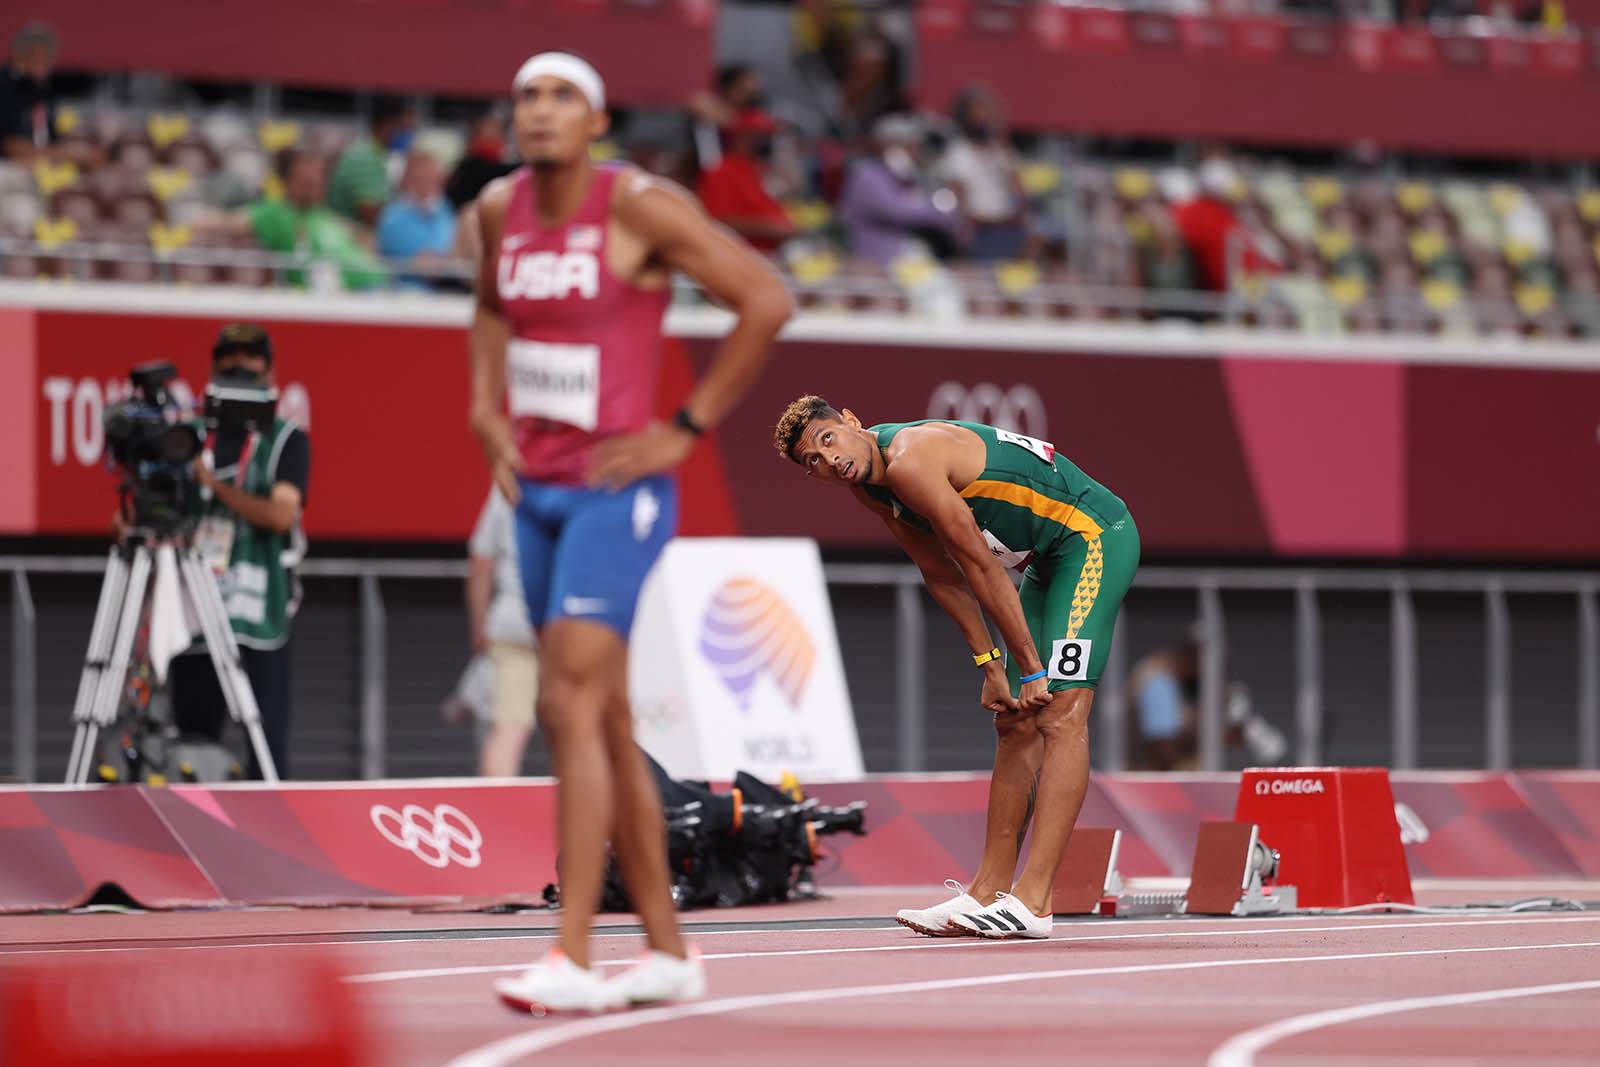 Wayde van Niekerk of South Africa looks at the scoreboard after failing to qualify for the final during the men's 400 meters semi-finals on August 2. 